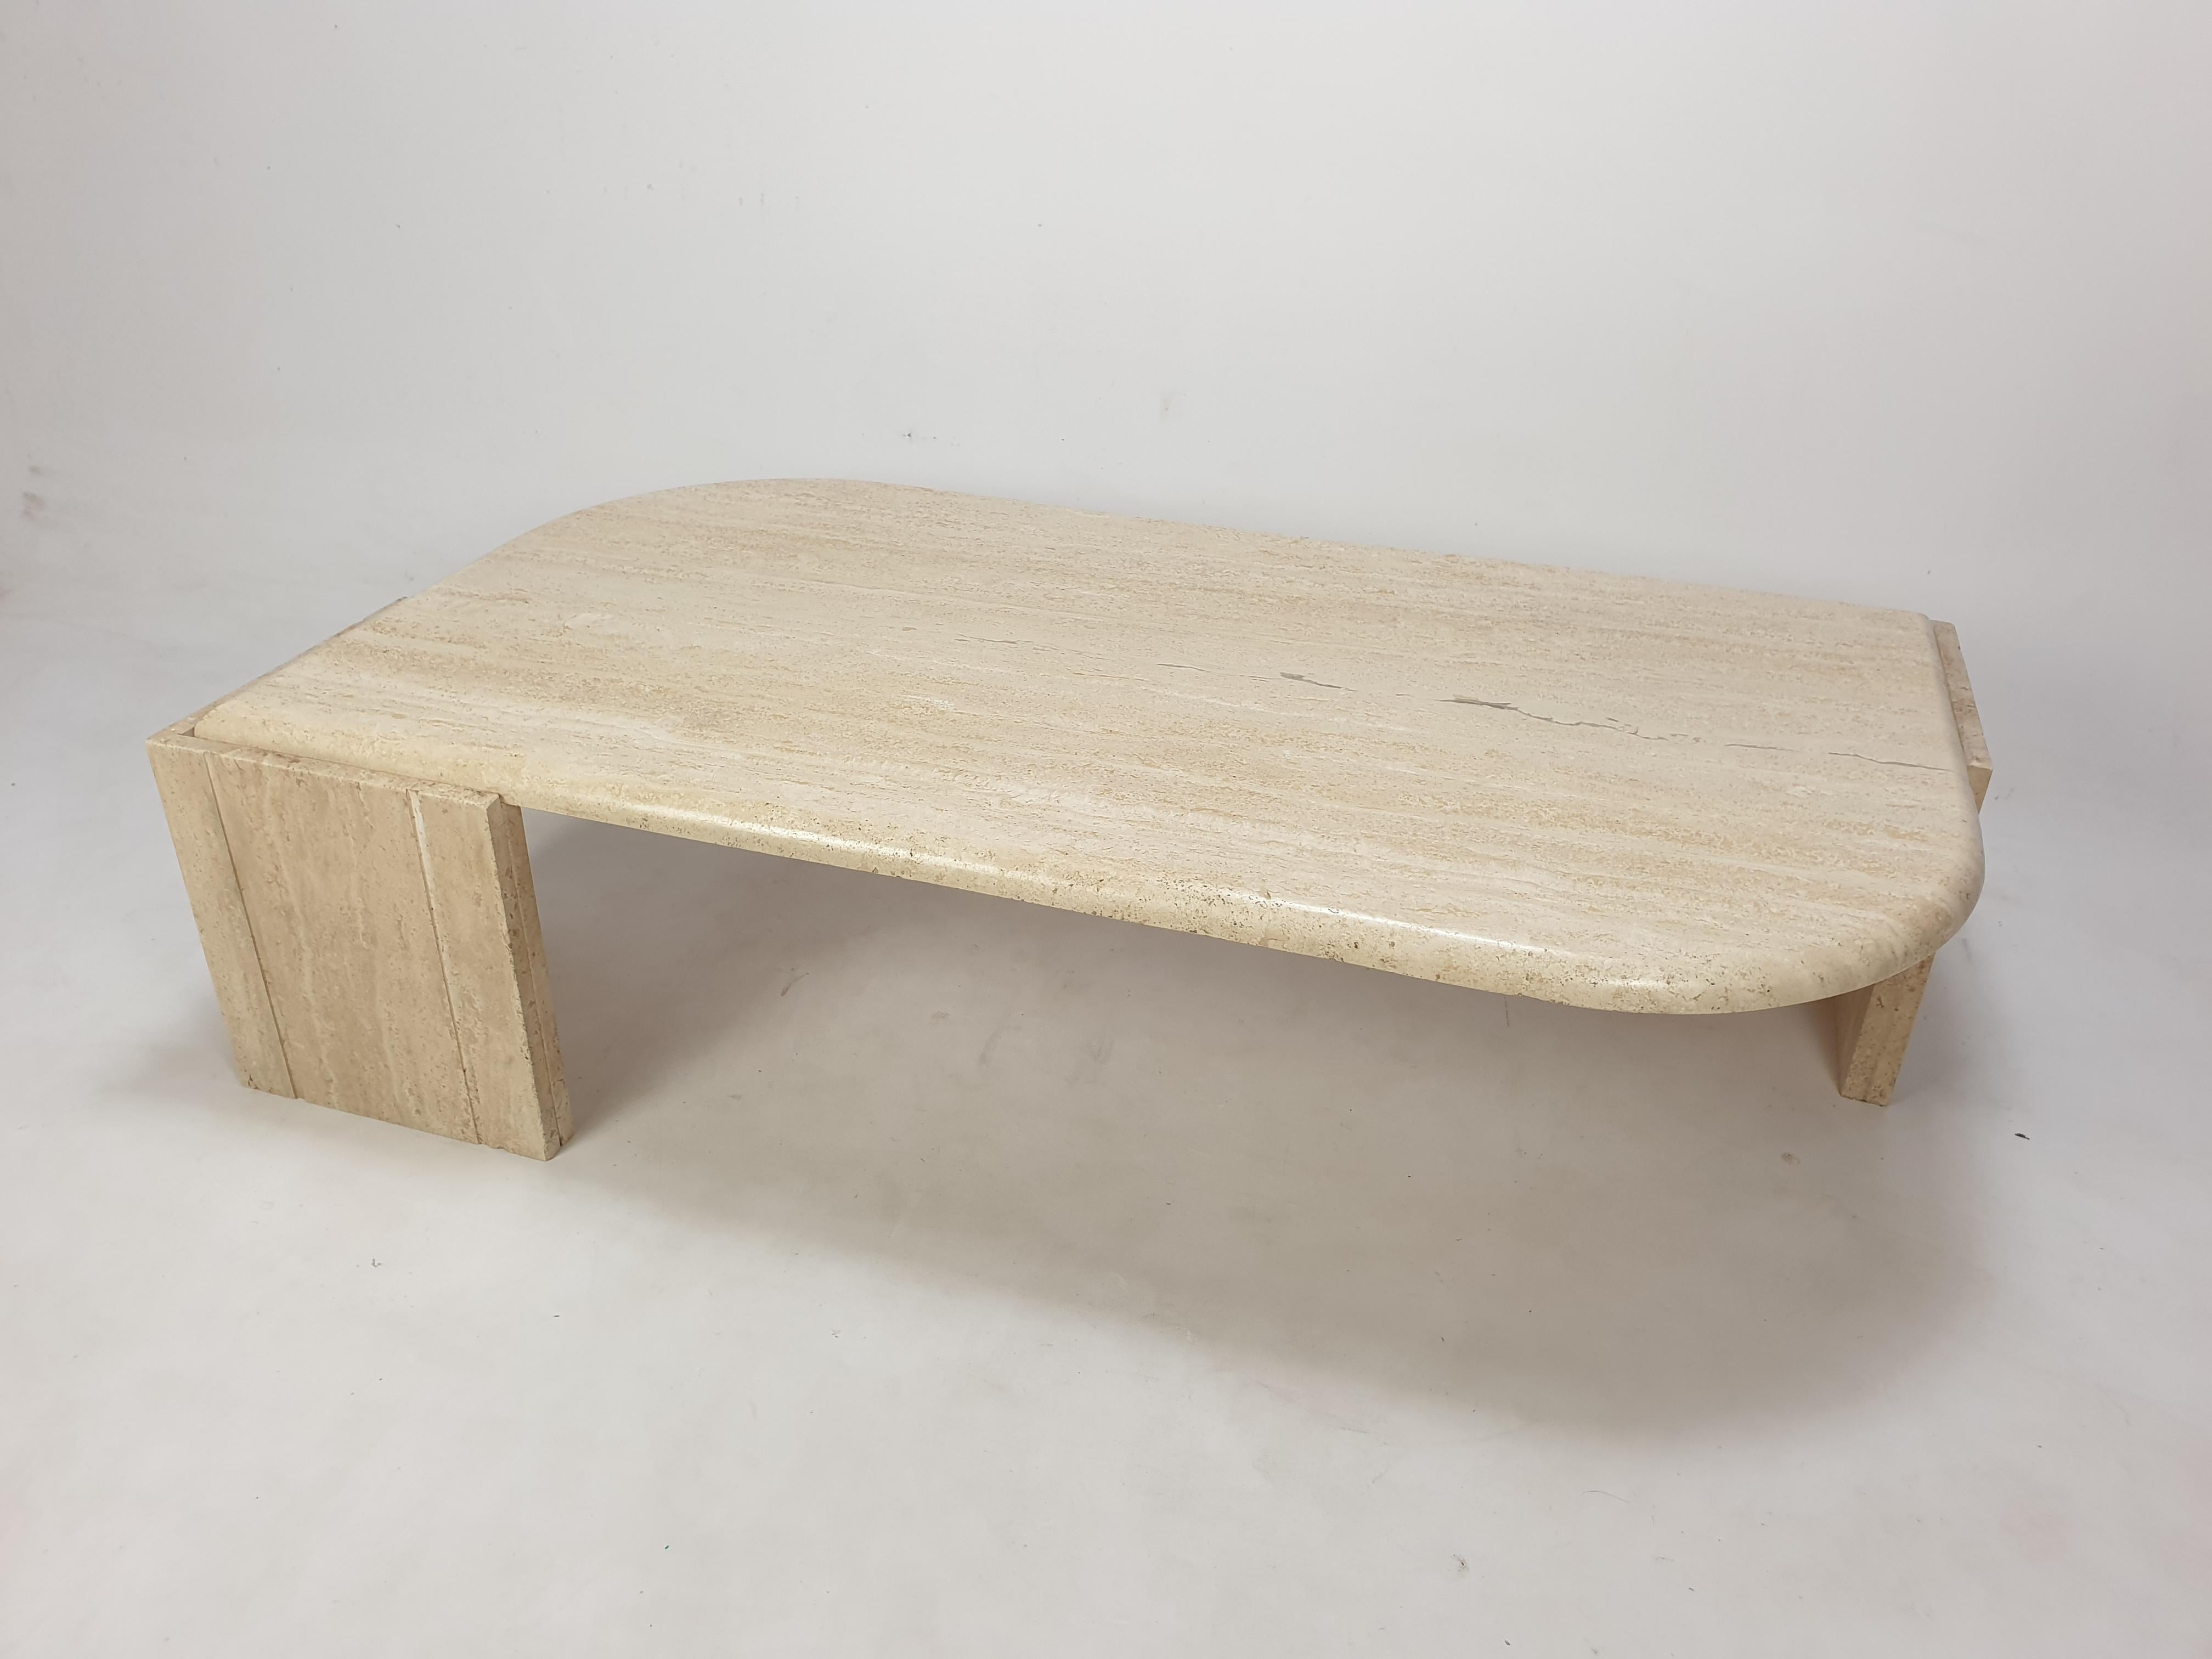 Very elegant Italian coffee table handcrafted out of travertine, 1980's.

The beautiful teardrop shaped top is rounded on the edge. 

The base is made of two separate pieces.